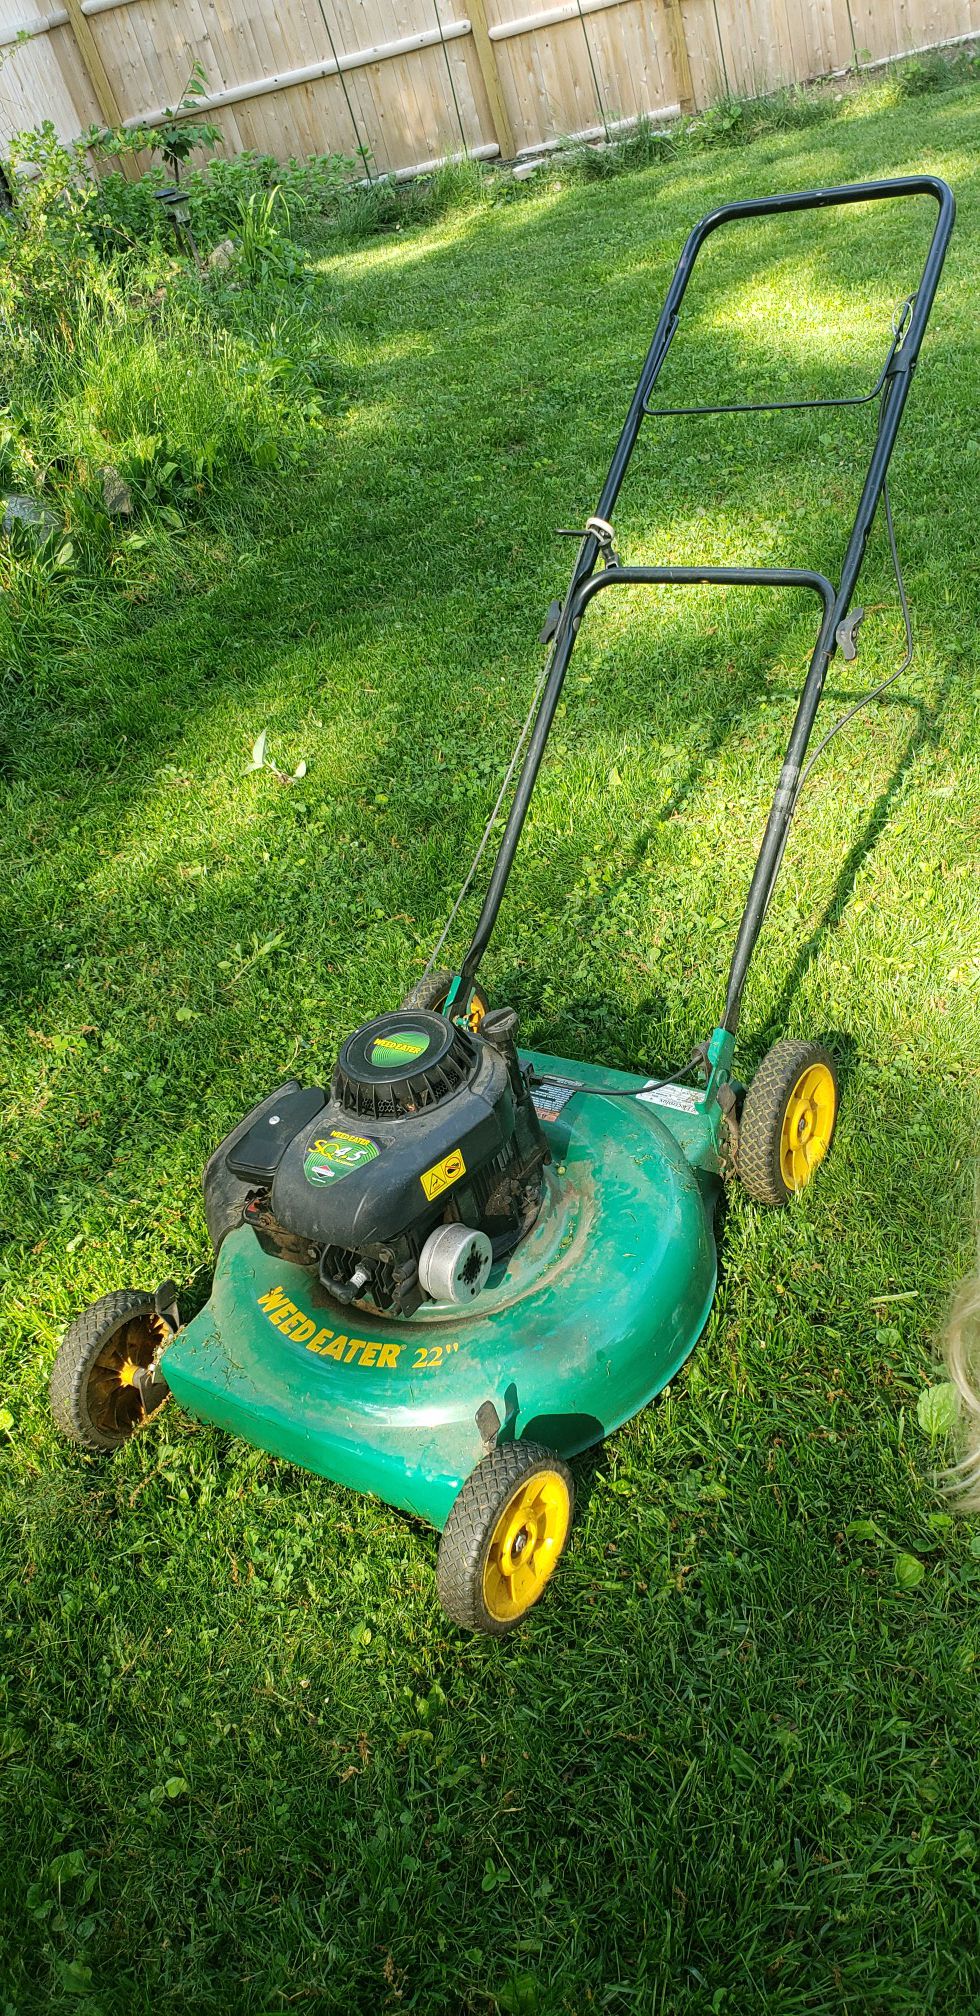 Weed Eater Lawn Mower, 22 inch 4.5 hp